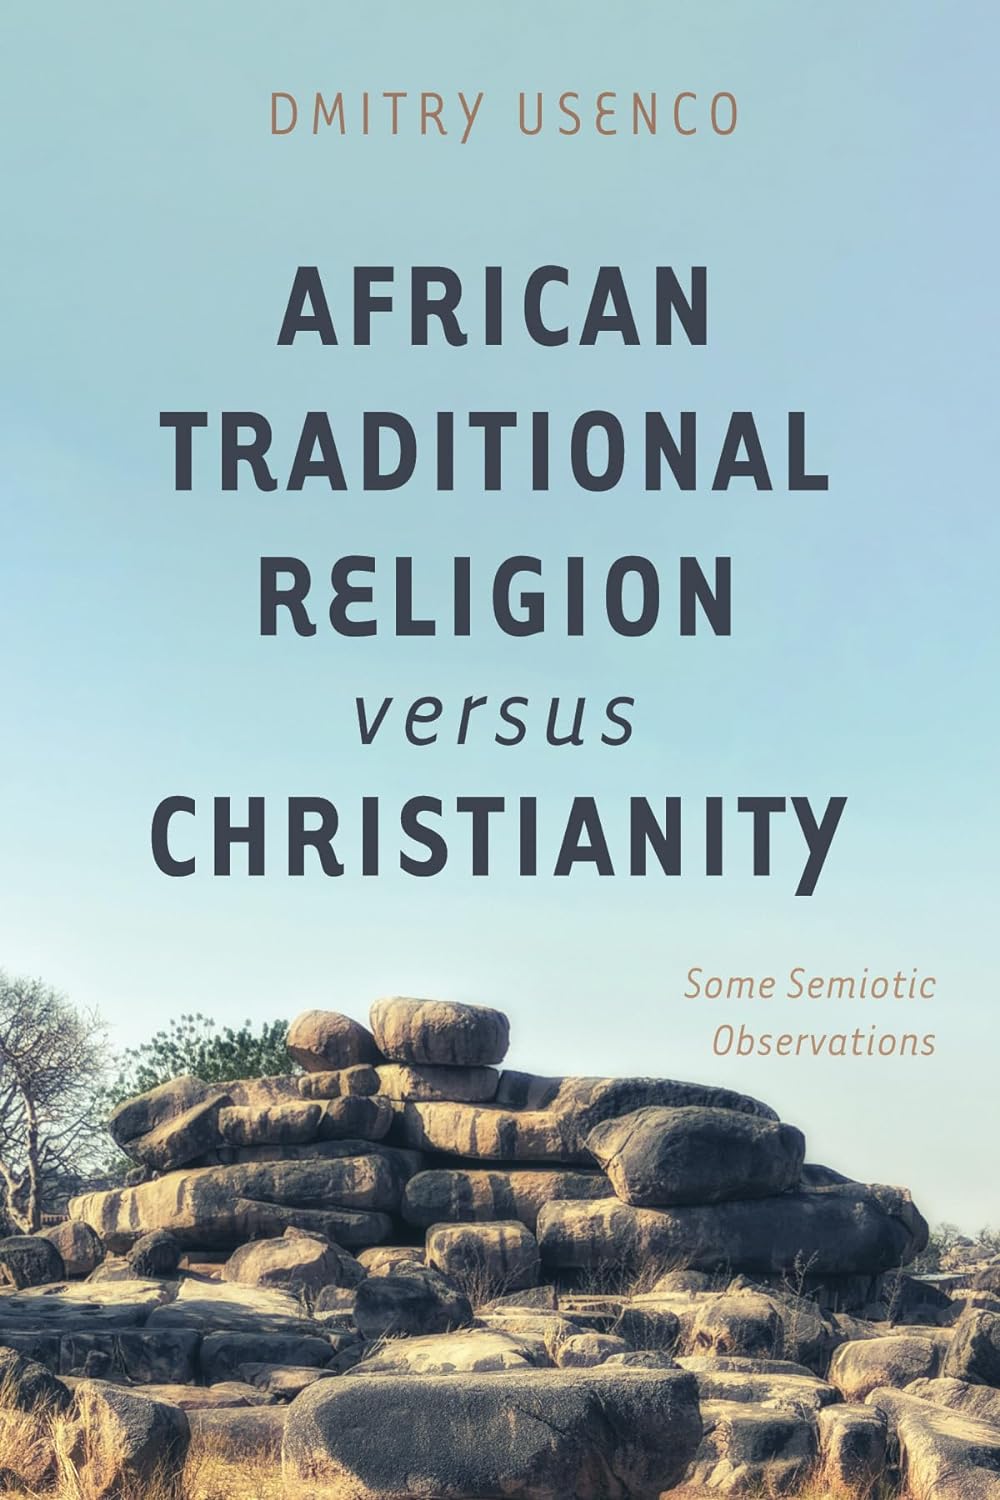 Bridging The Gap Between Africa and The Contemporary World With "African Traditional Religion versus Christianity"